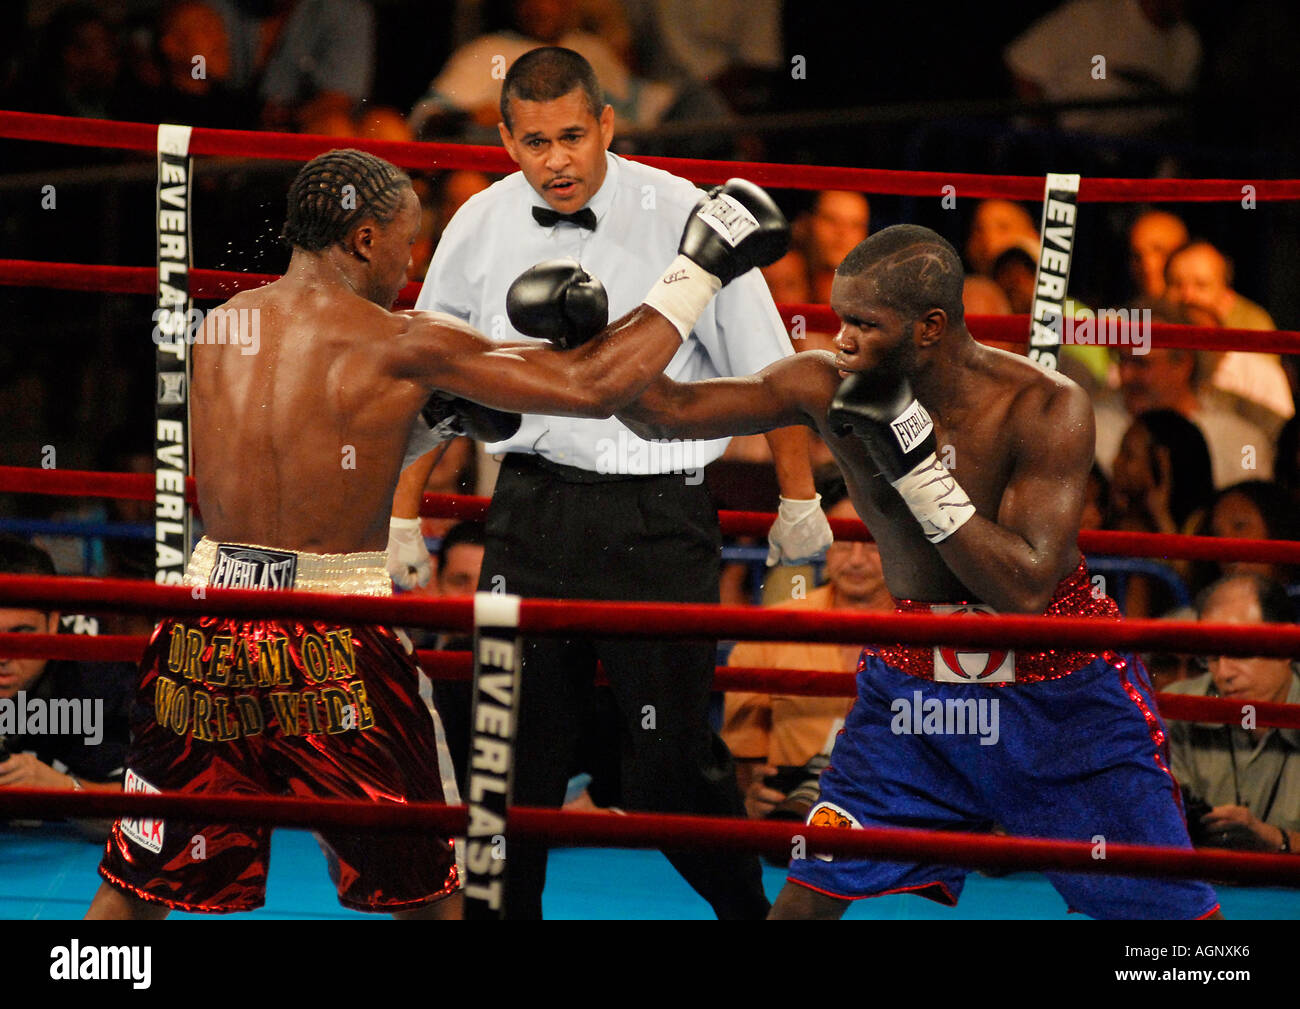 New York August 5 2006 HBO World Championship Boxing at the